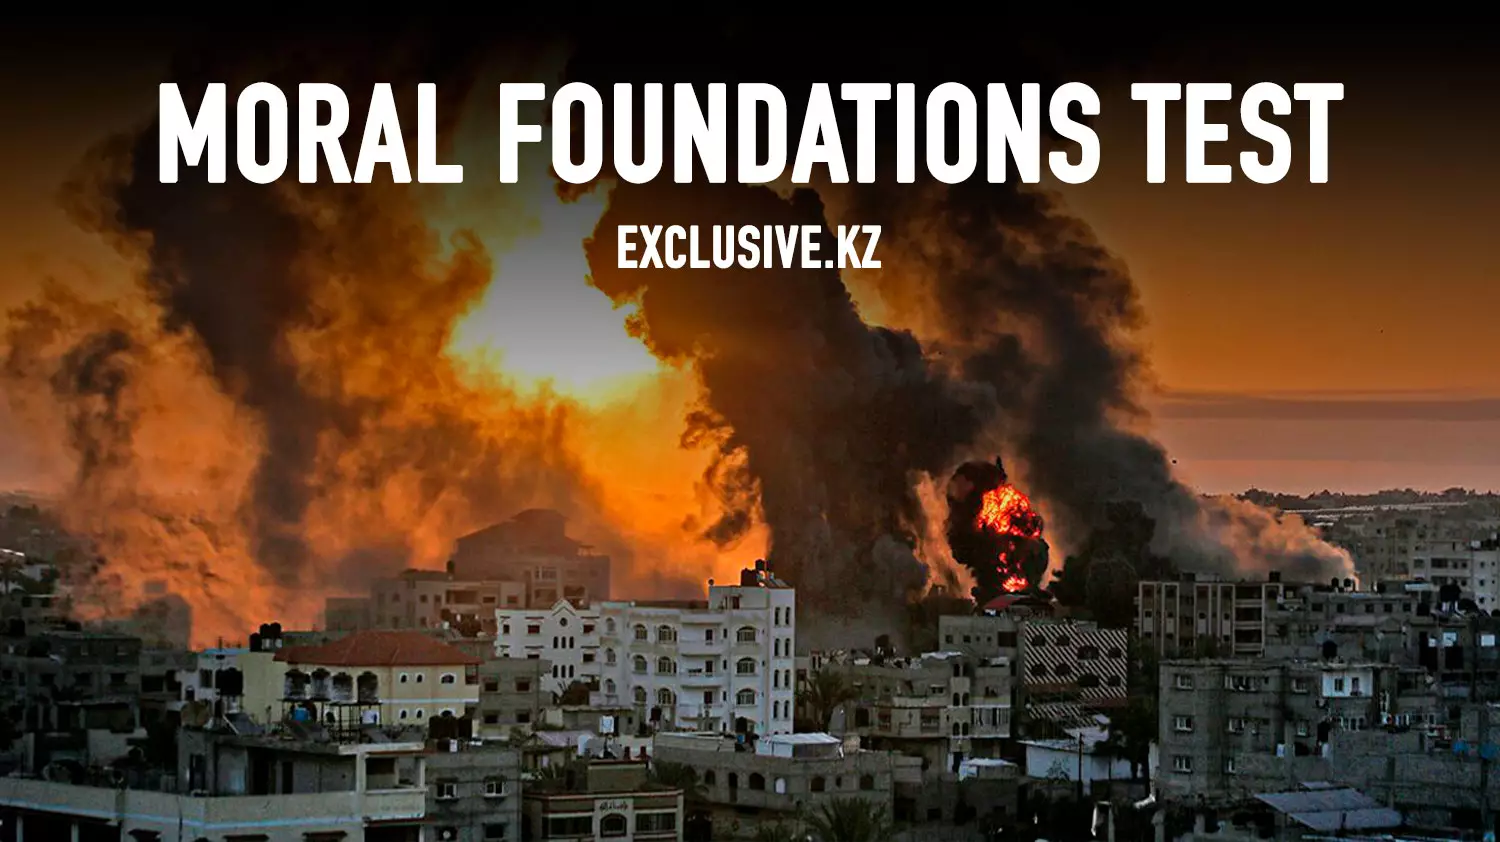 The Rules-Based International Order Is Collapsing in Gaza